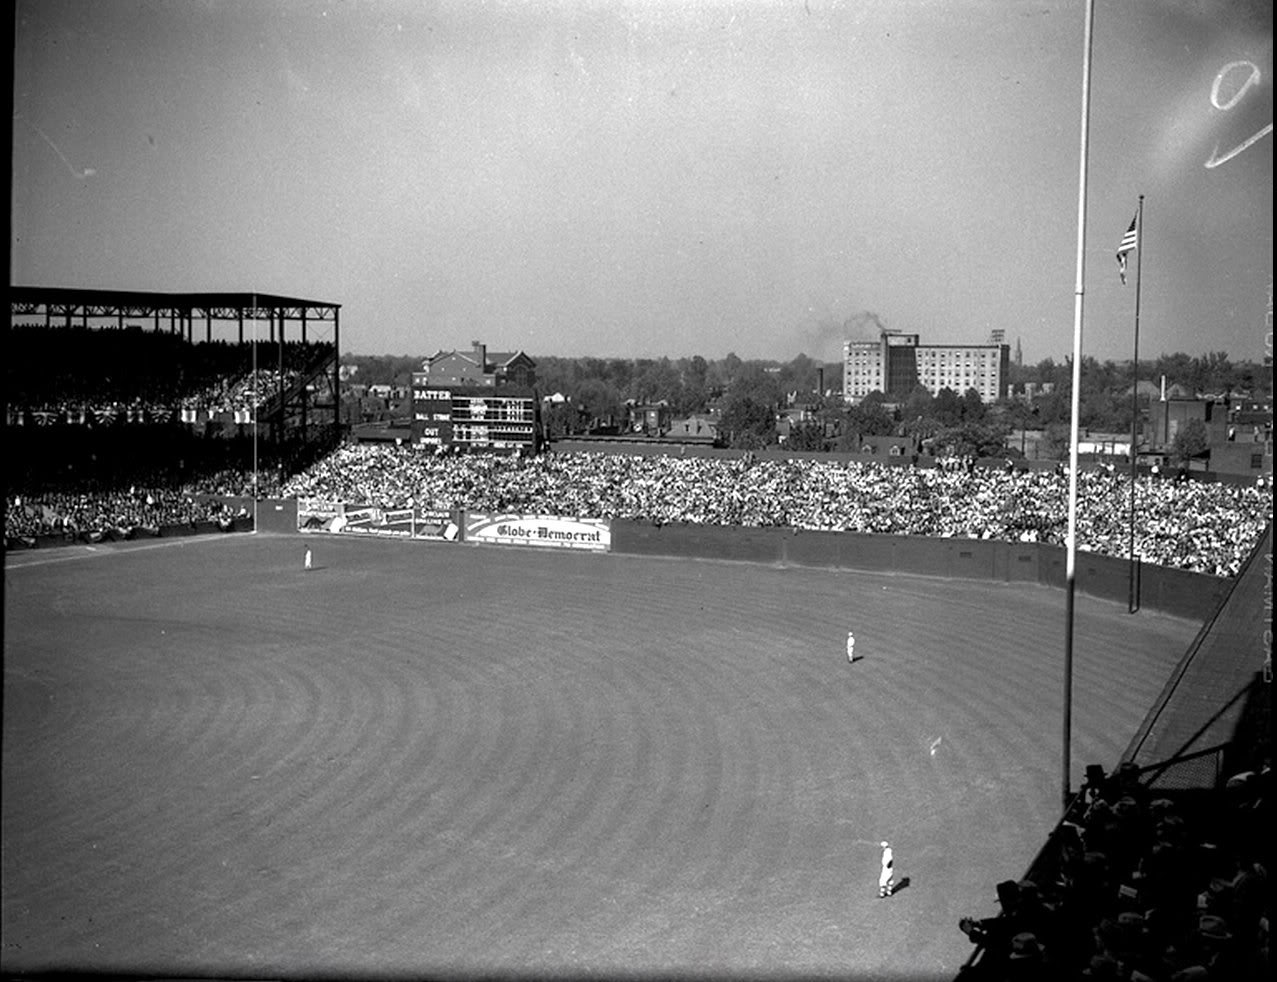 Sportsmans Park - history, photos and more of the St. Louis Cardinals former ballpark